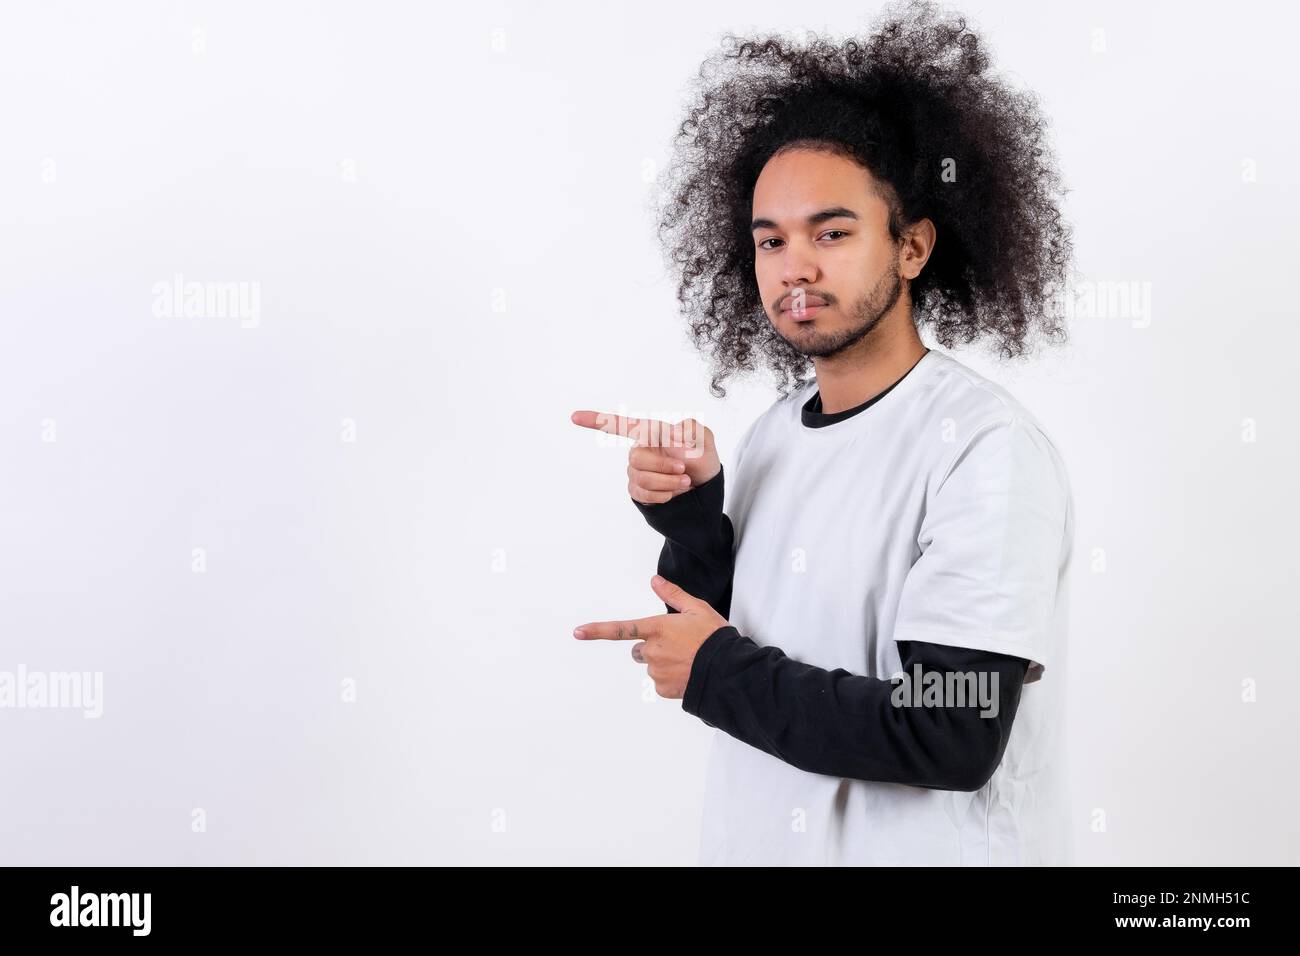 Pointing to the left at a copy paste space. Young man with afro hair on white background Stock Photo